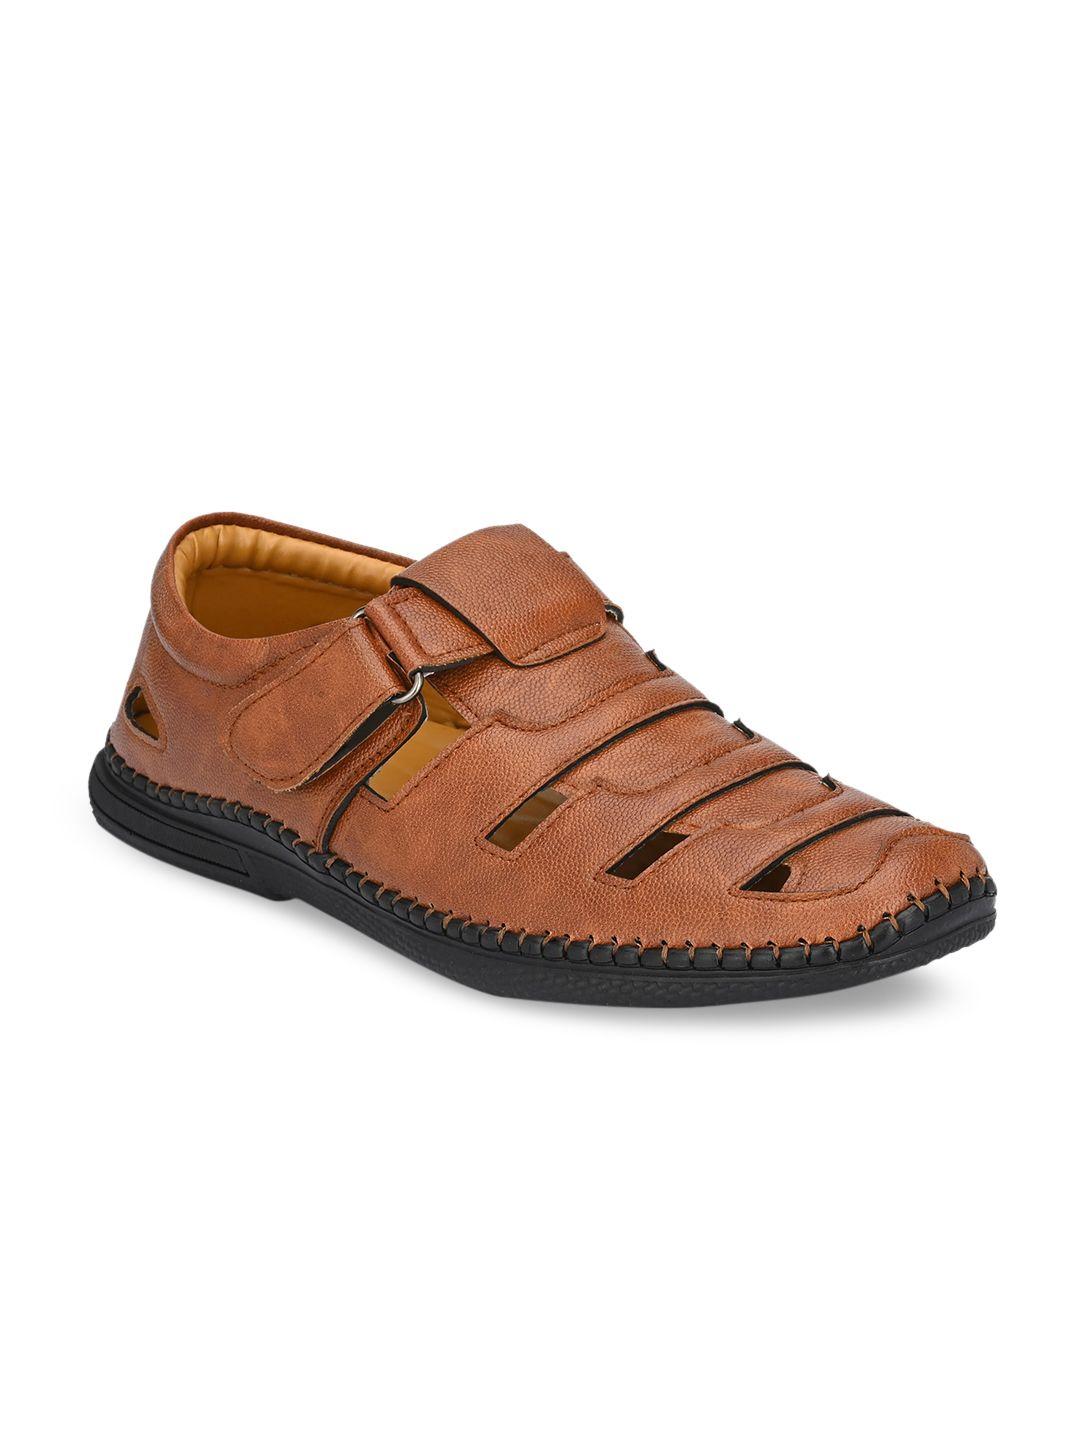 the roadster lifestyle co men tan brown shoe-style sandals